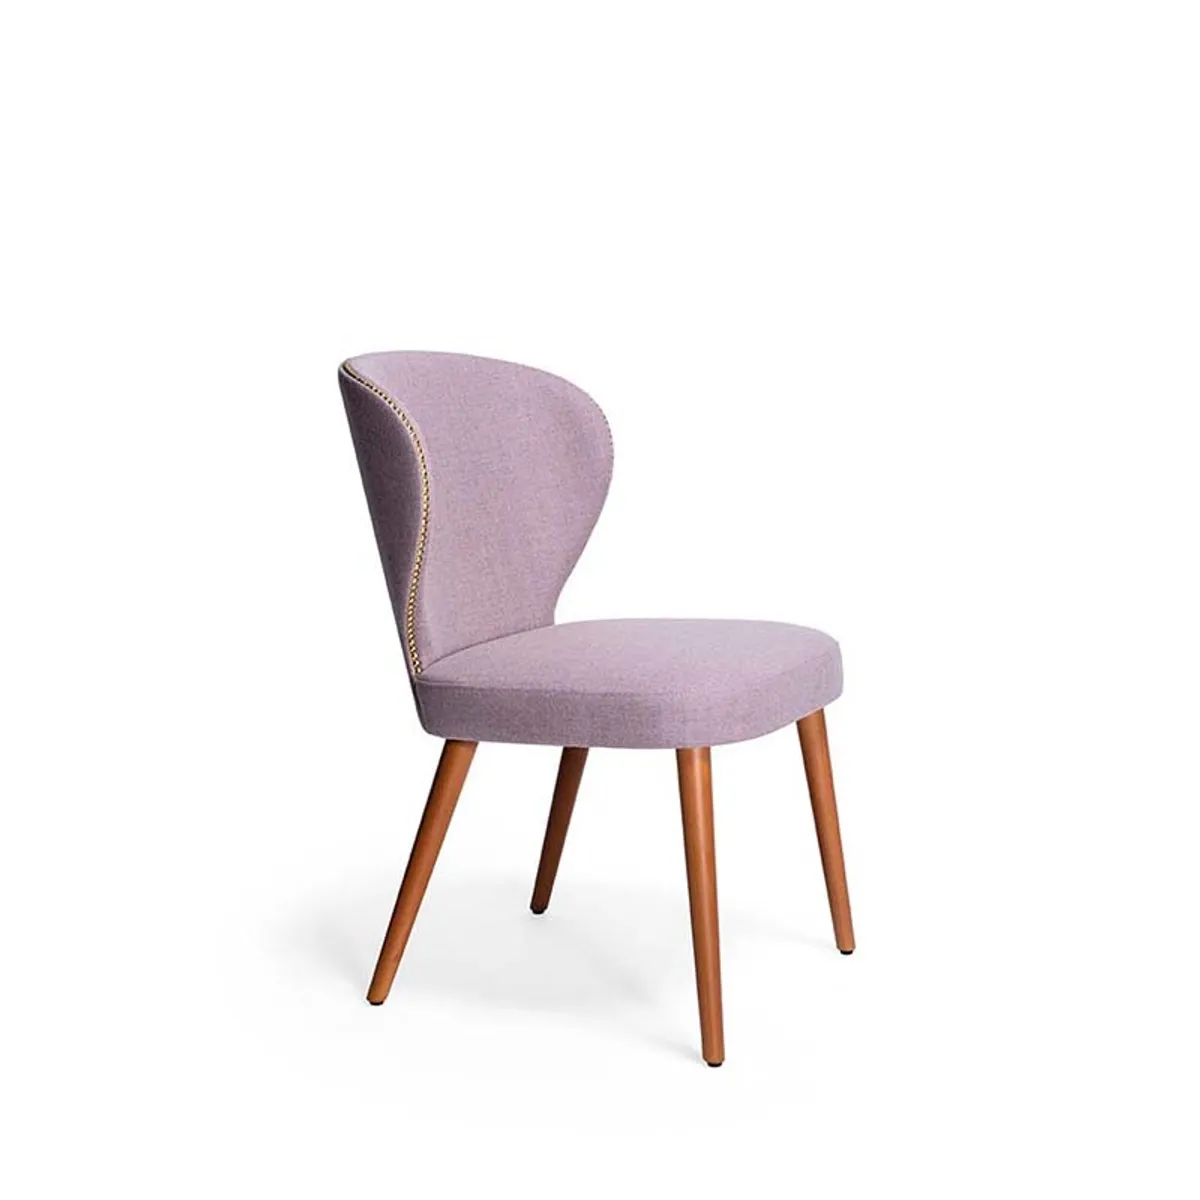 Abbraccio Scl Special Side Chair Inside Out Contracts